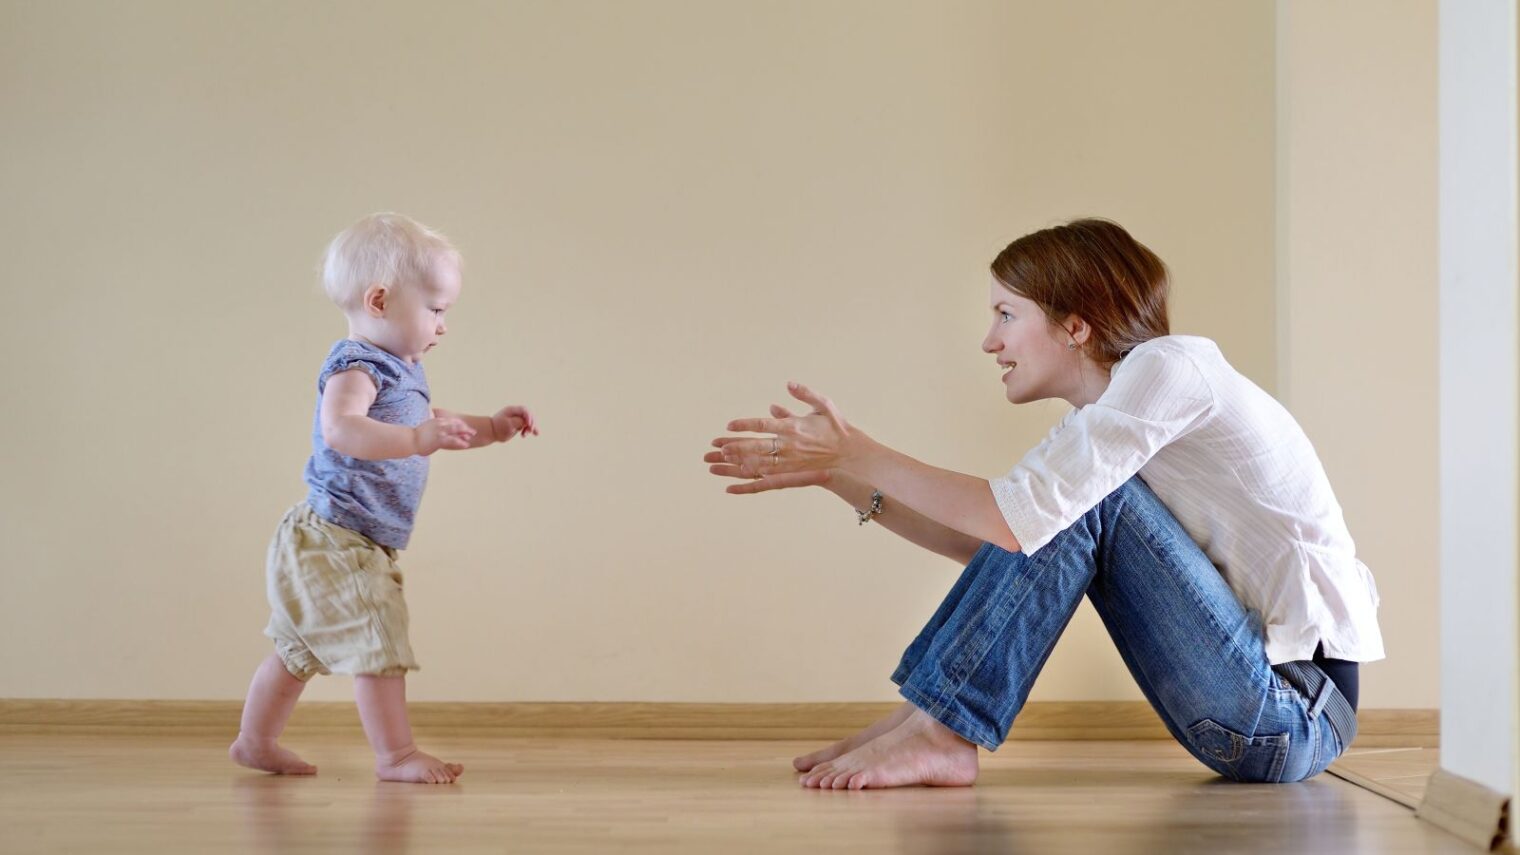 Is baby walking at the right time? Photo via www.shutterstock.com